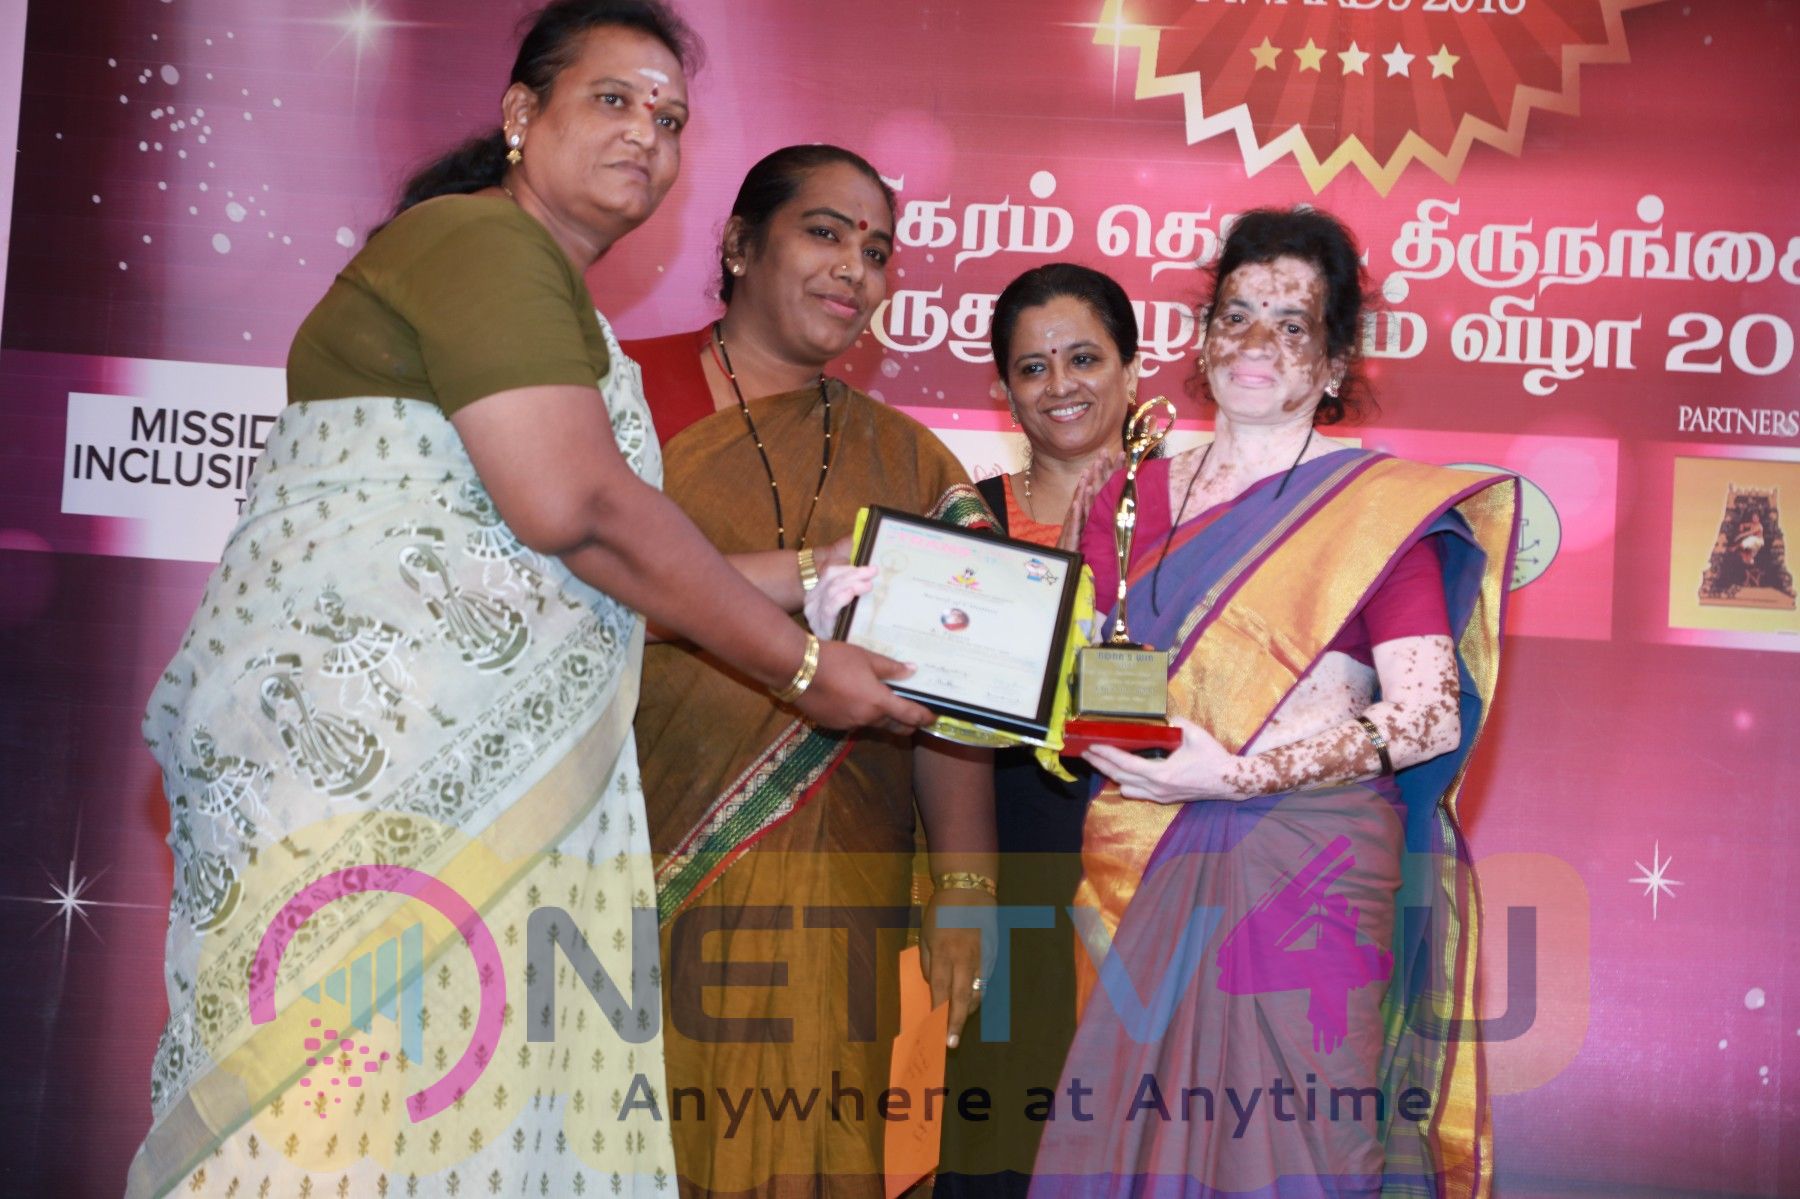 6th Trans Achiever Awards Images Tamil Gallery